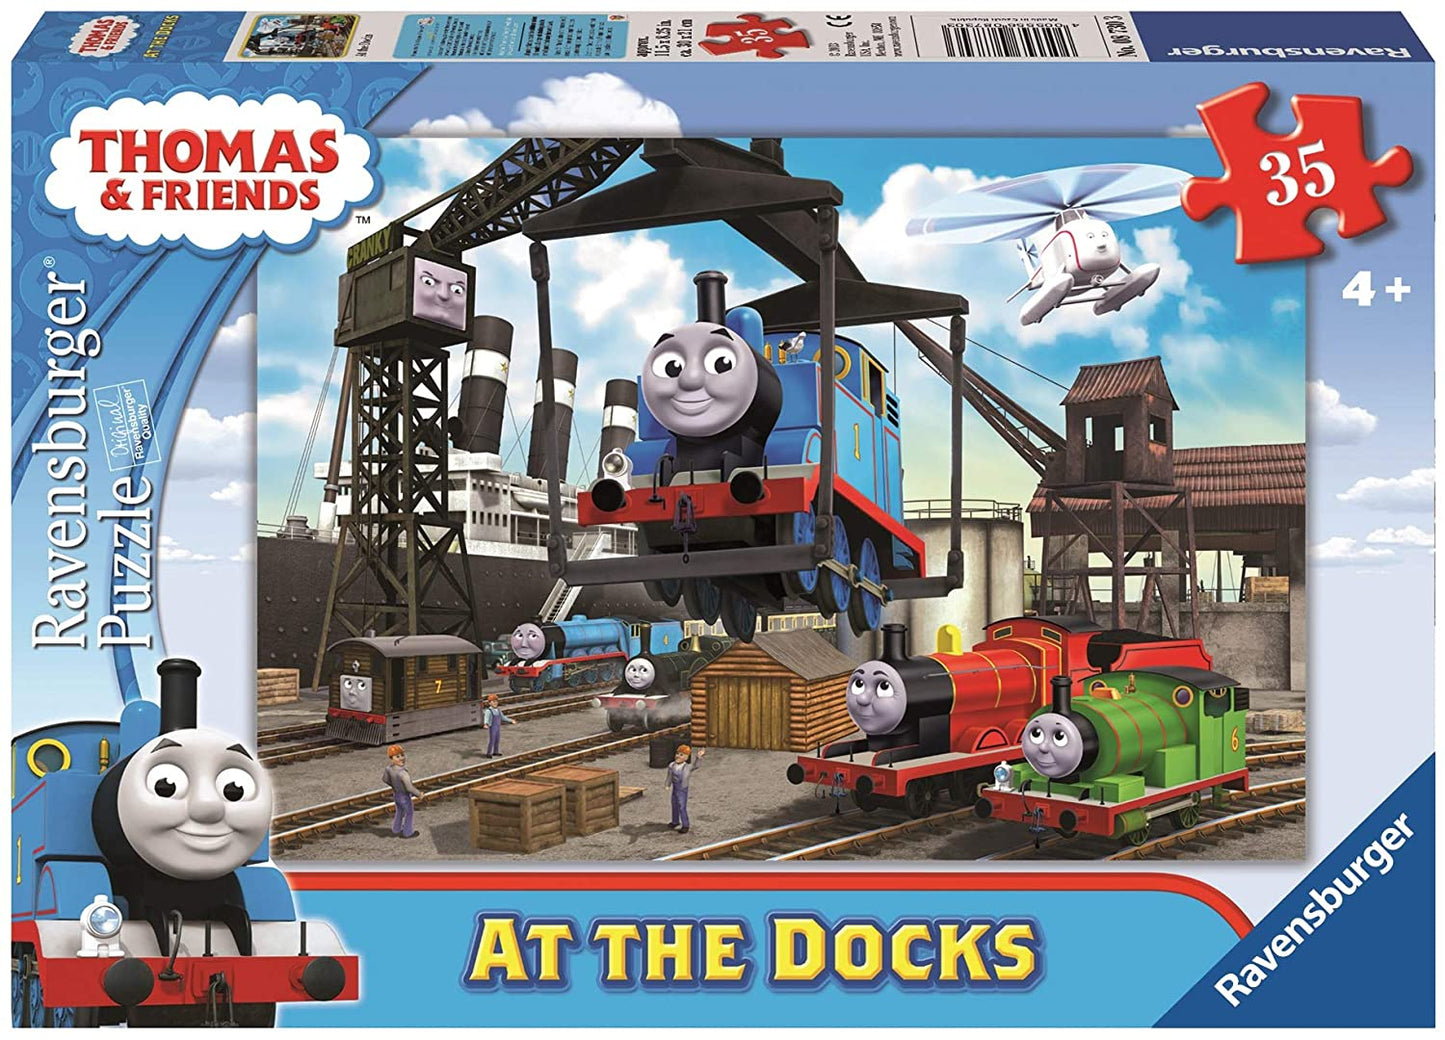 Ravensburger Thomas & Friends at The Docks 35 Piece Jigsaw Puzzle for Kids – Every Piece is Unique, Pieces Fit Together Perfectly